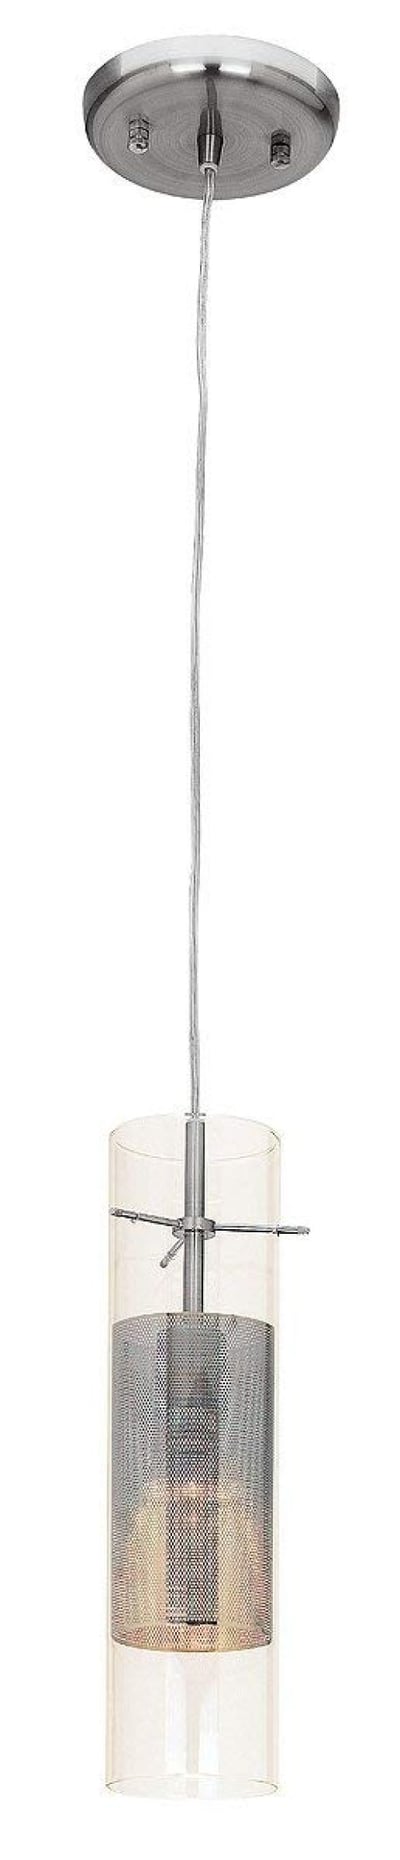 Spartan - 1-Light Pendant - Brushed Steel Finish - Metal Mesh in Clear Glass Shade